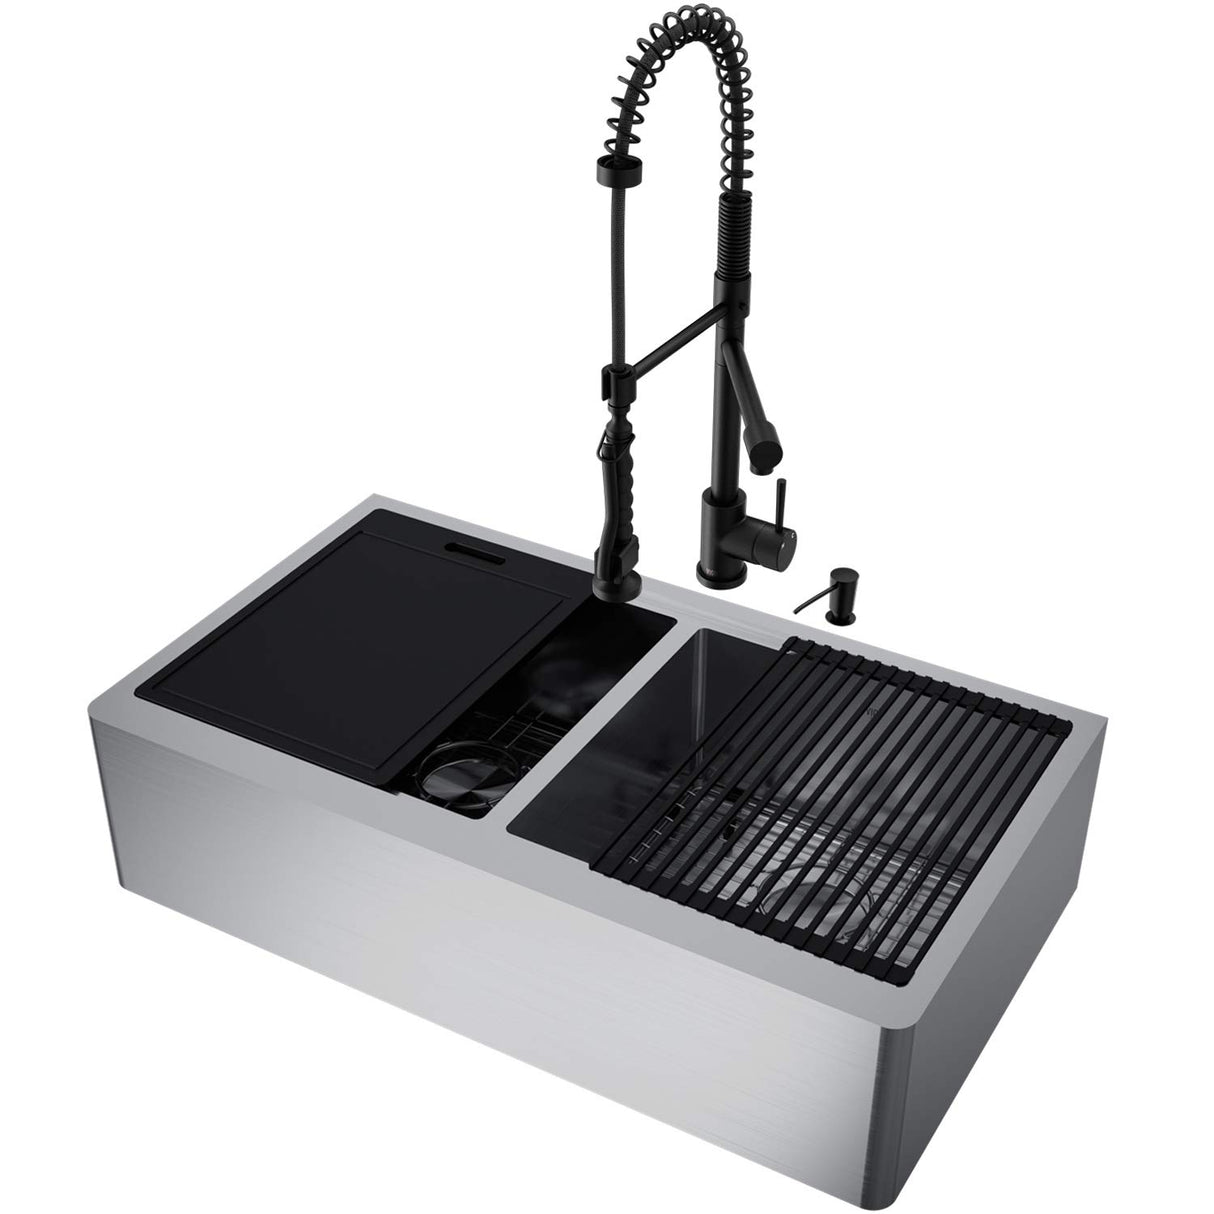 VIGO VG15929 20.5" L -36.0" W -27.25" H Stainless Steel Double-Bowl Farmhouse Kitchen Sink Set with Matte Black Faucet, Soap Dispenser, Cutting Board, Grids and Strainers